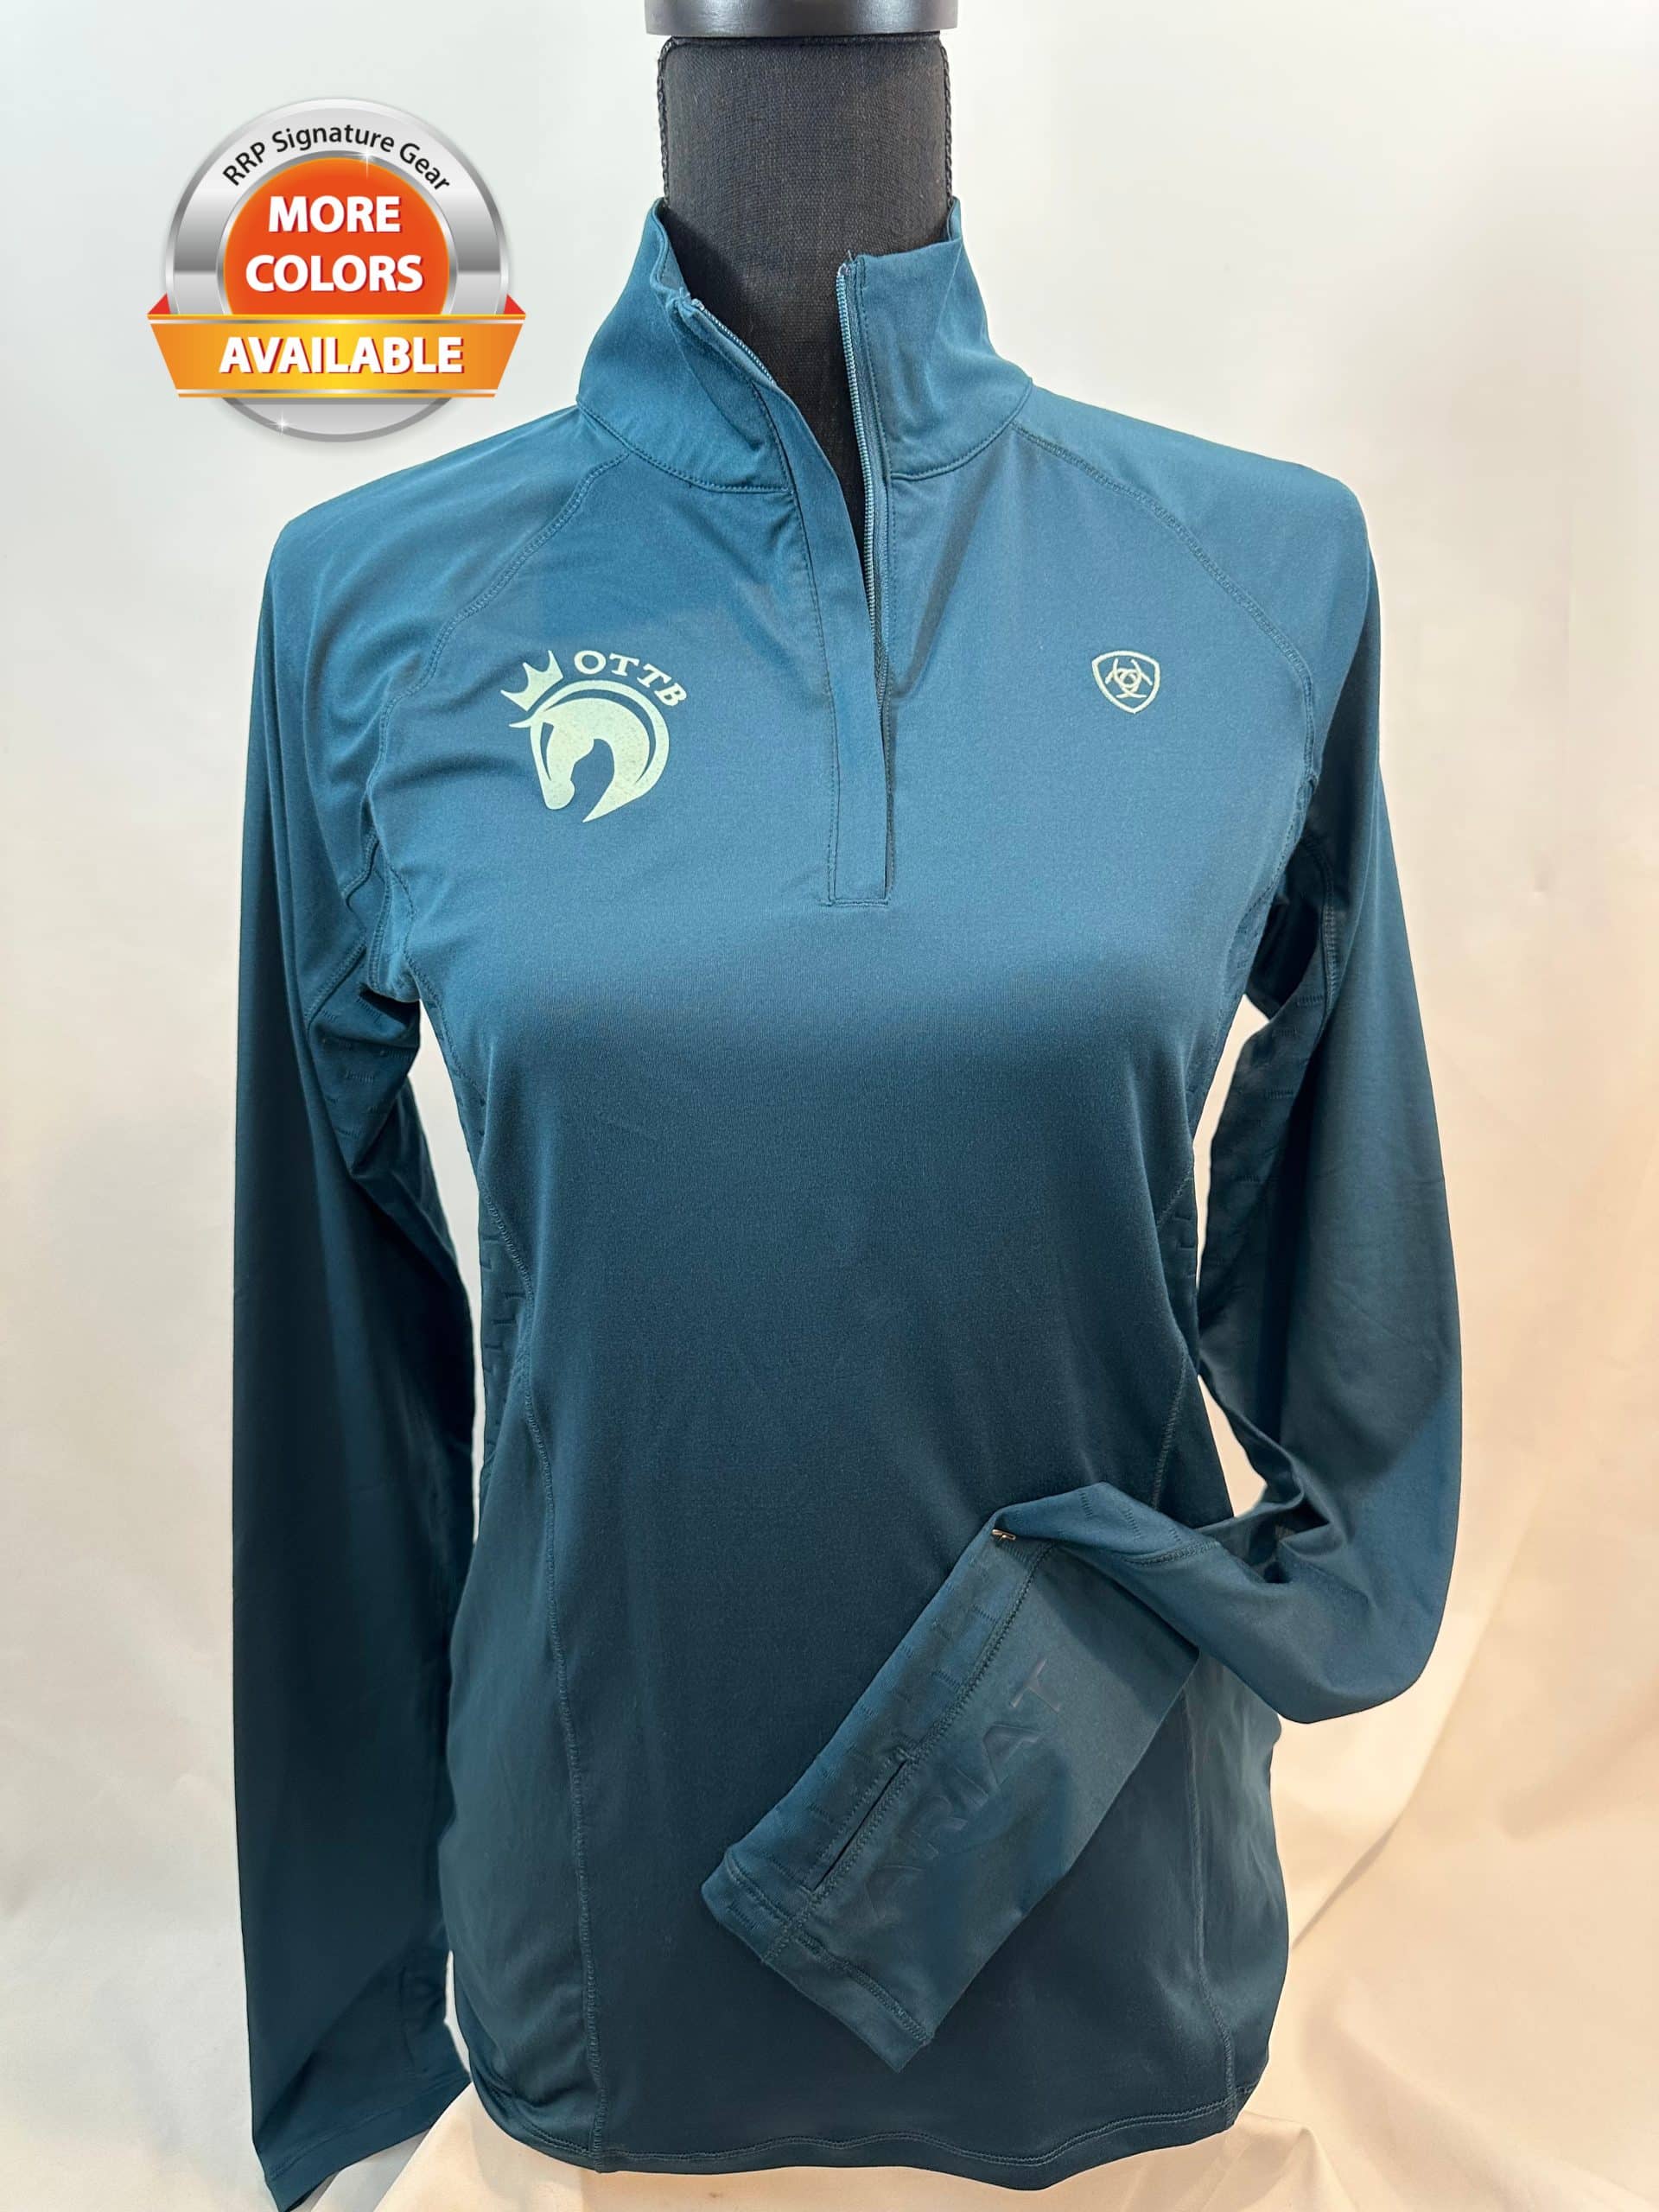 Featured image for “Ariat Lowell 2.0 1/4 Zip Baselayer”